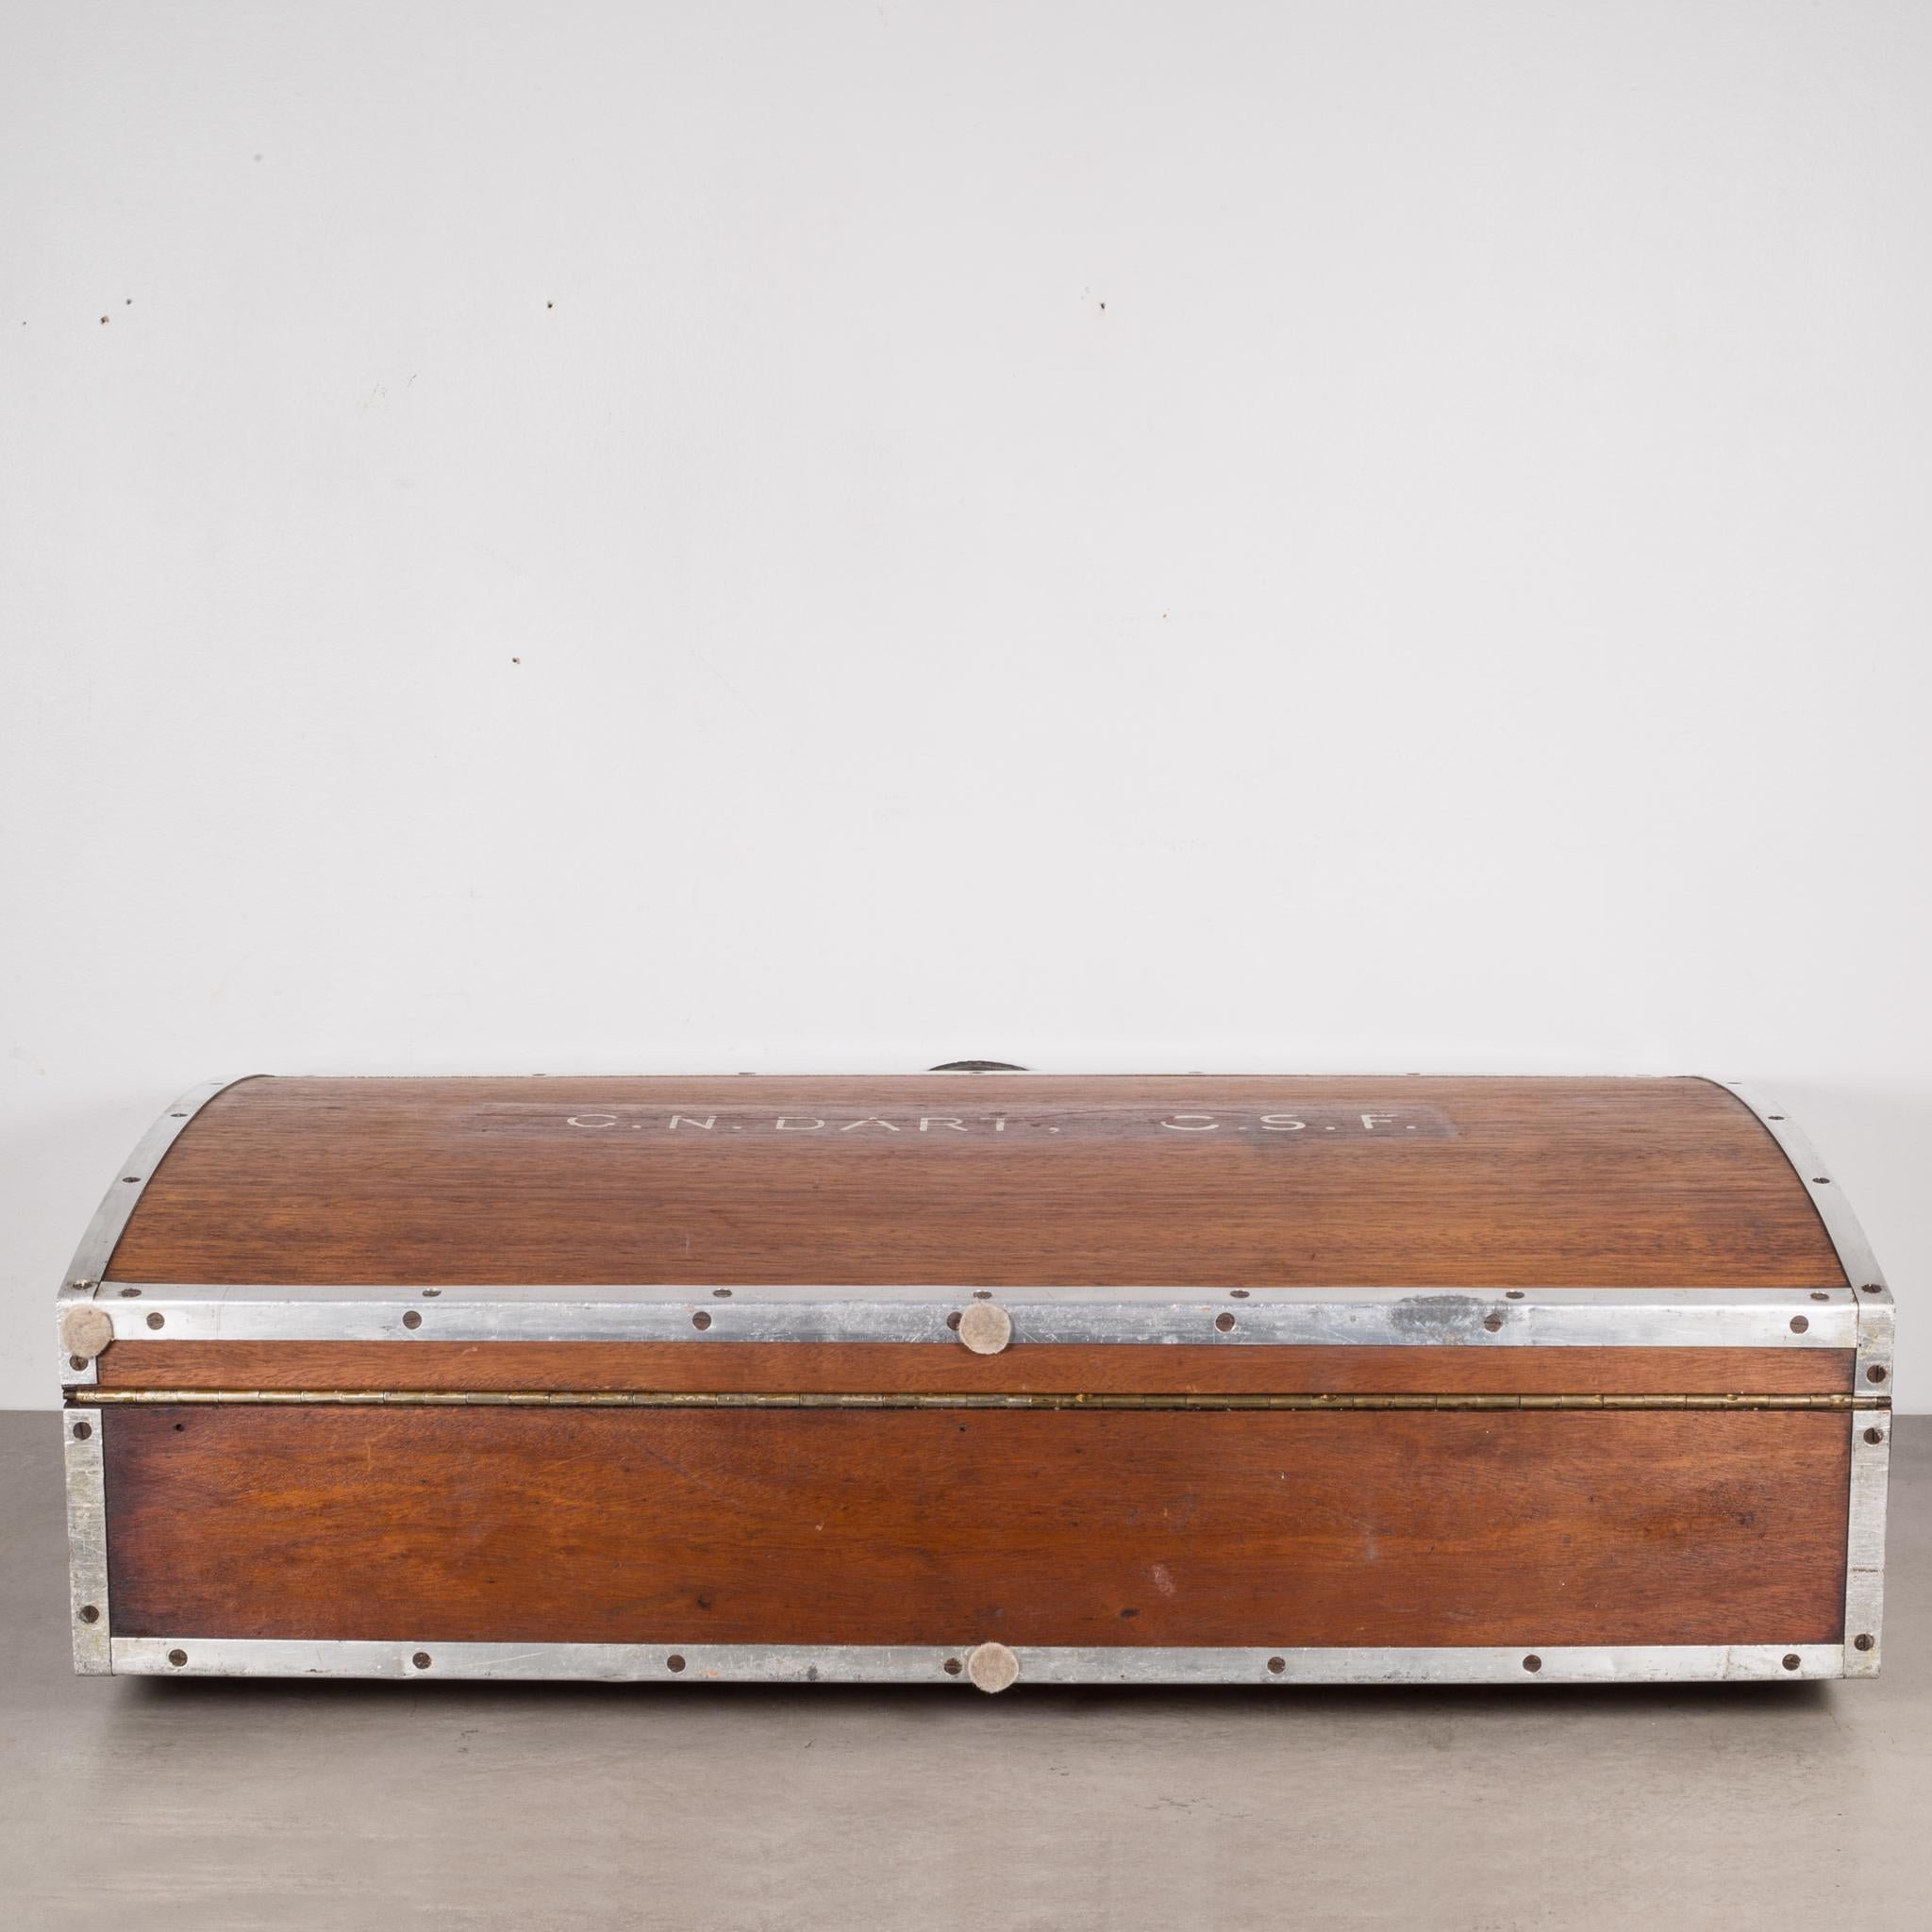 Industrial Wooden Suitcase with Leather Handle, circa 1940